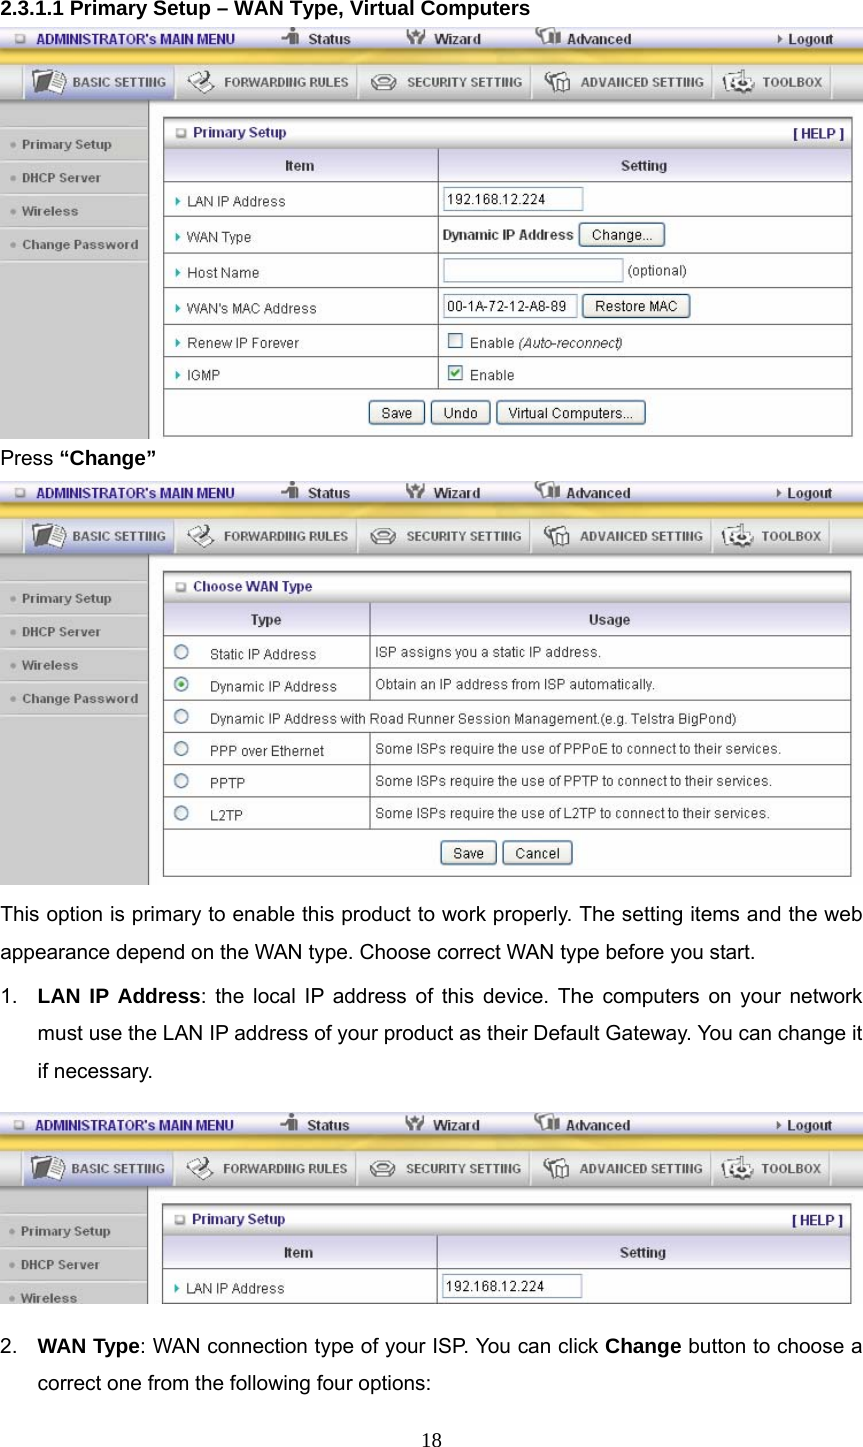  18 2.3.1.1 Primary Setup – WAN Type, Virtual Computers  Press “Change”  This option is primary to enable this product to work properly. The setting items and the web appearance depend on the WAN type. Choose correct WAN type before you start. 1.  LAN IP Address: the local IP address of this device. The computers on your network must use the LAN IP address of your product as their Default Gateway. You can change it if necessary.  2.  WAN Type: WAN connection type of your ISP. You can click Change button to choose a correct one from the following four options: 